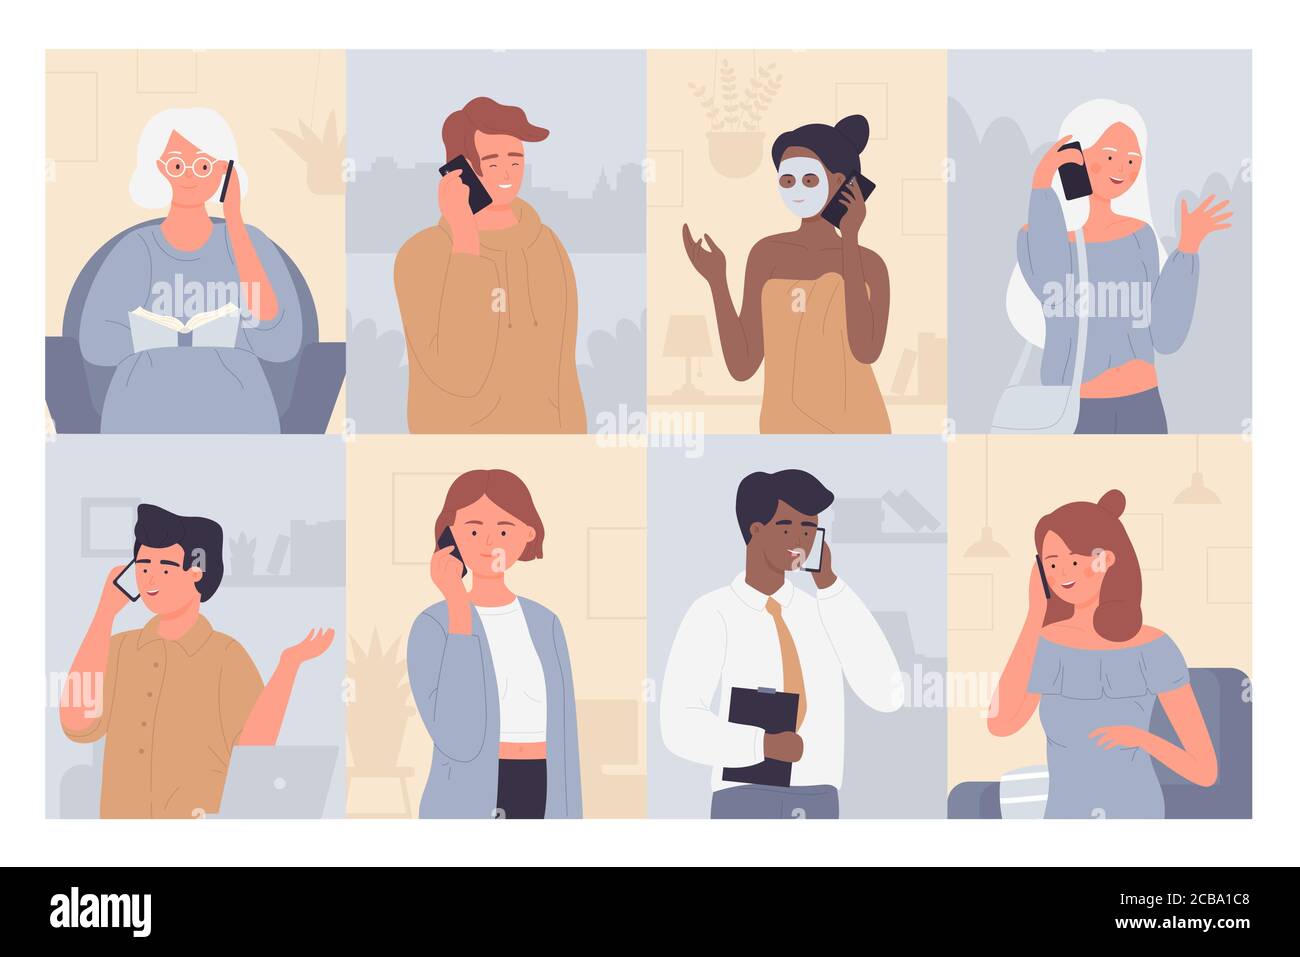 People talk on phone vector illustration set. Cartoon flat man woman characters talking with family, friends or business partner, cellphone conversation or mobile dialogue collection background Stock Vector